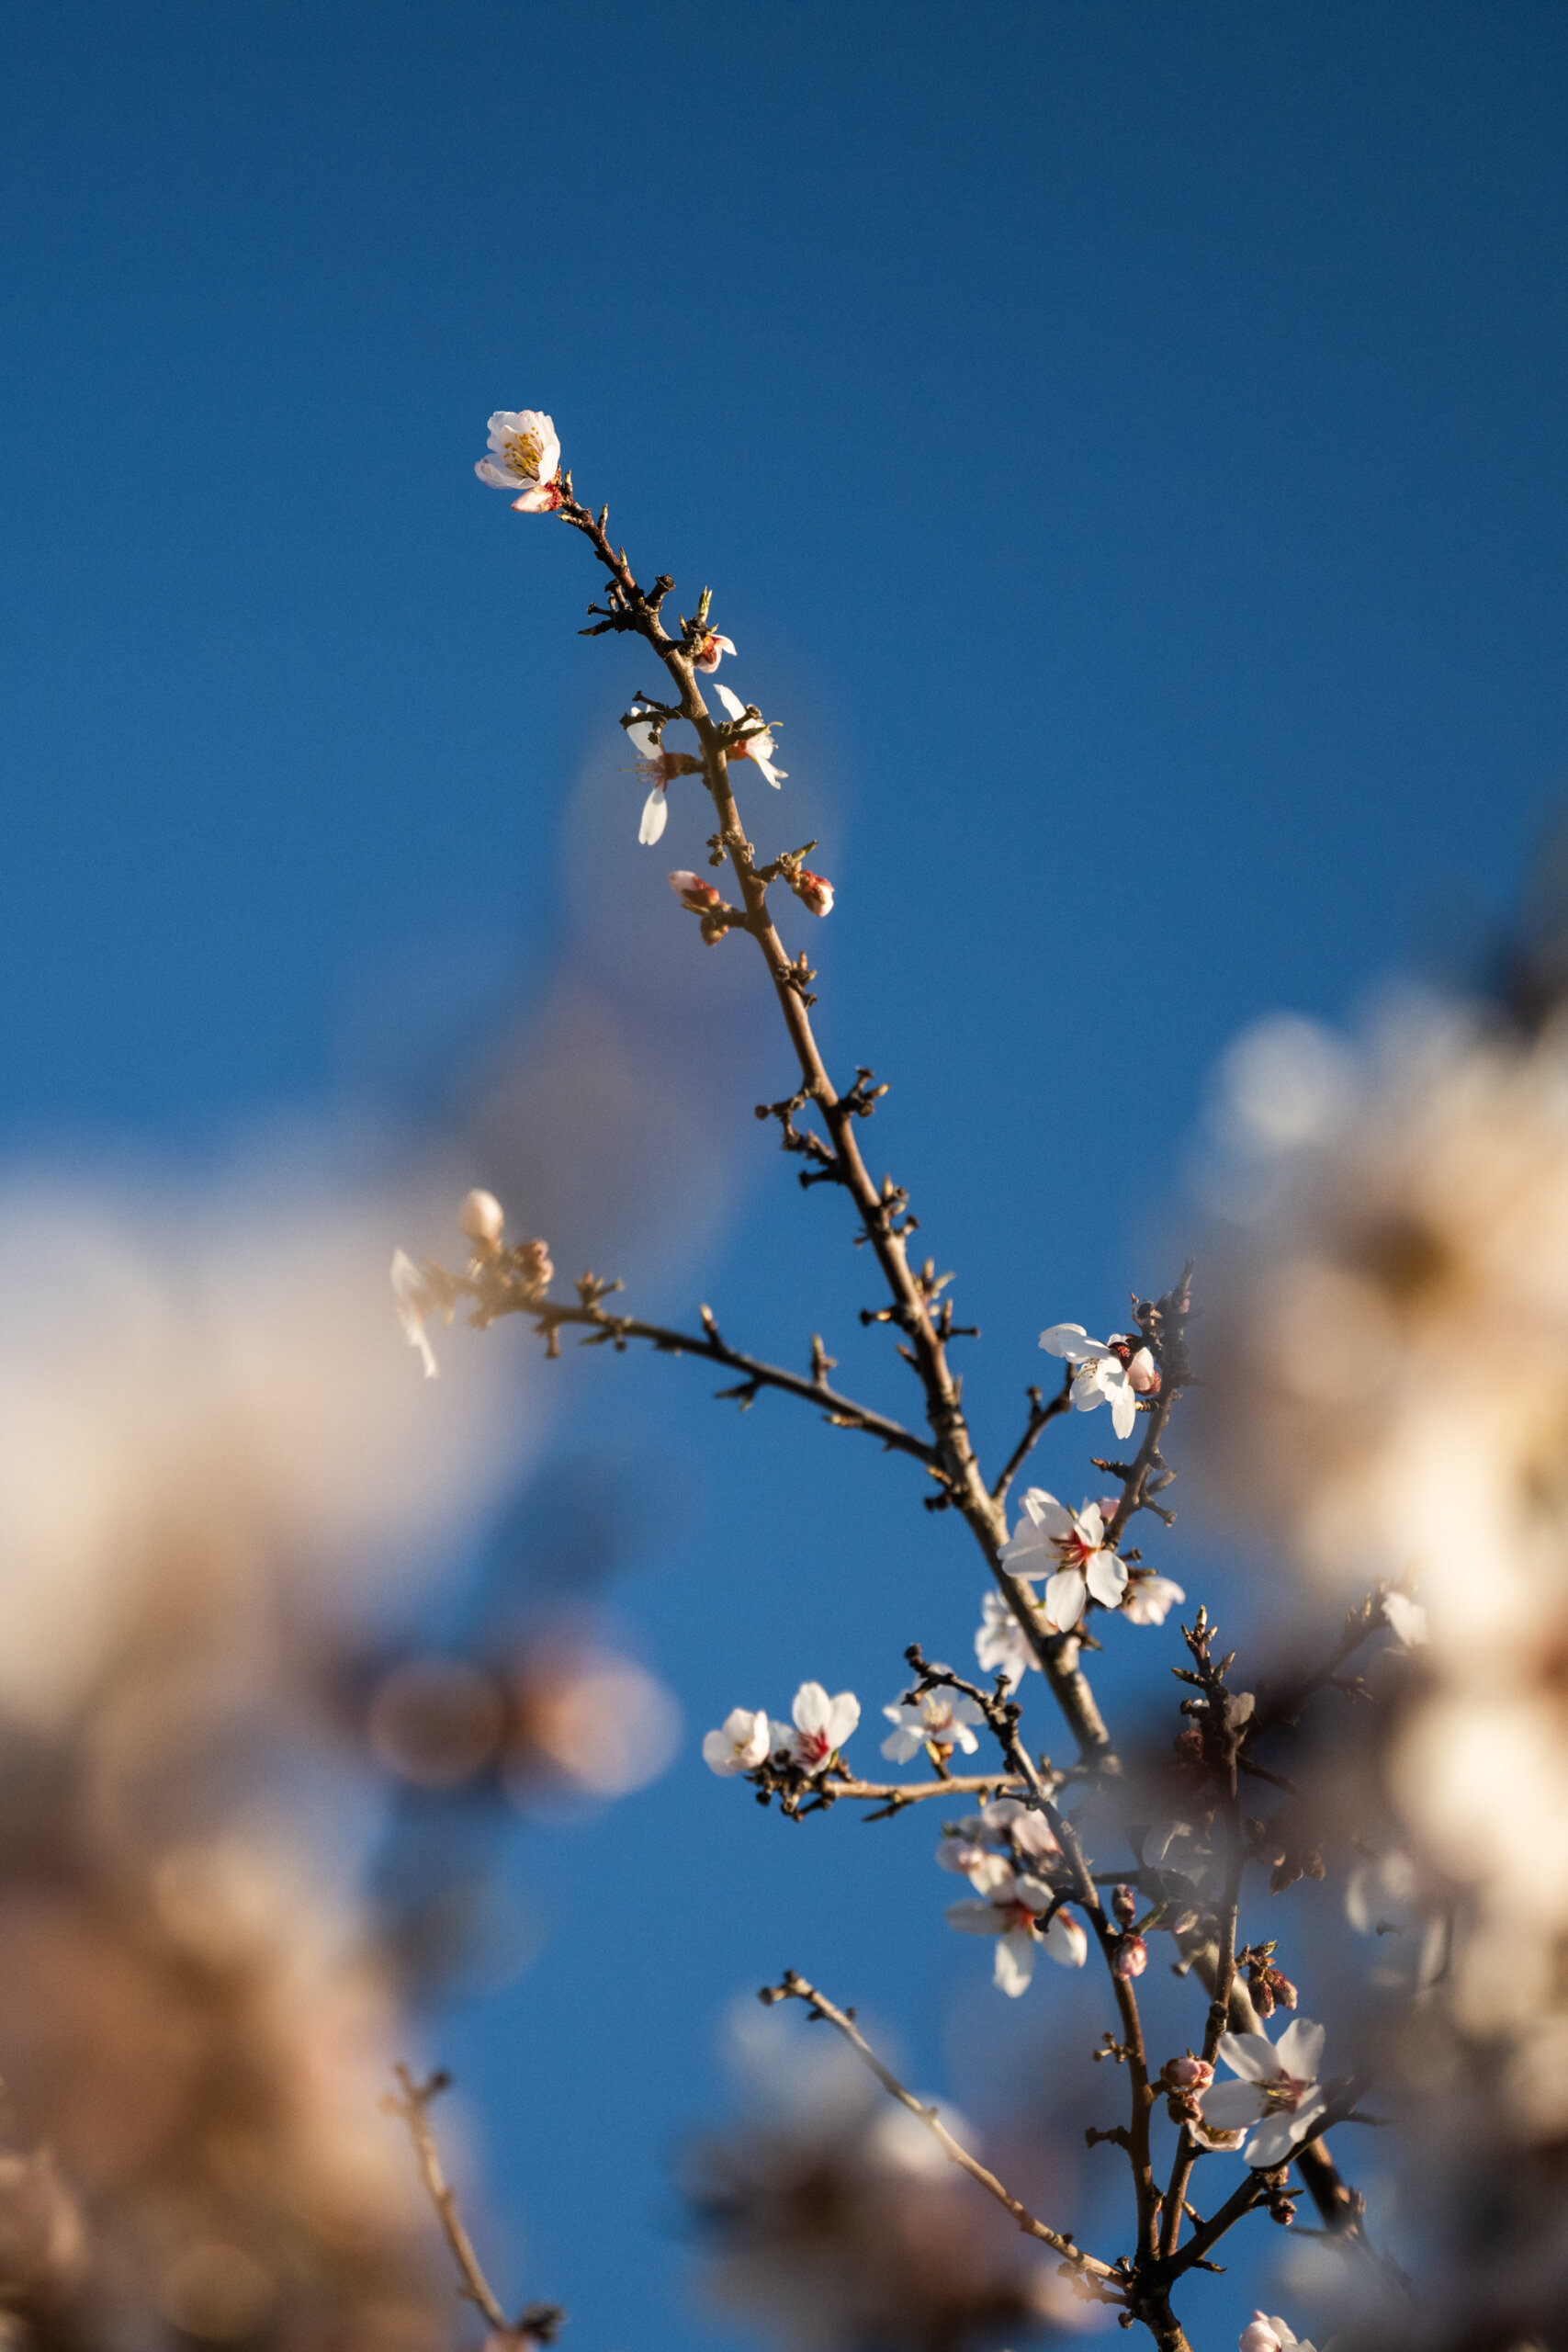 An outcrop from an almond tree with a blossom on the tip